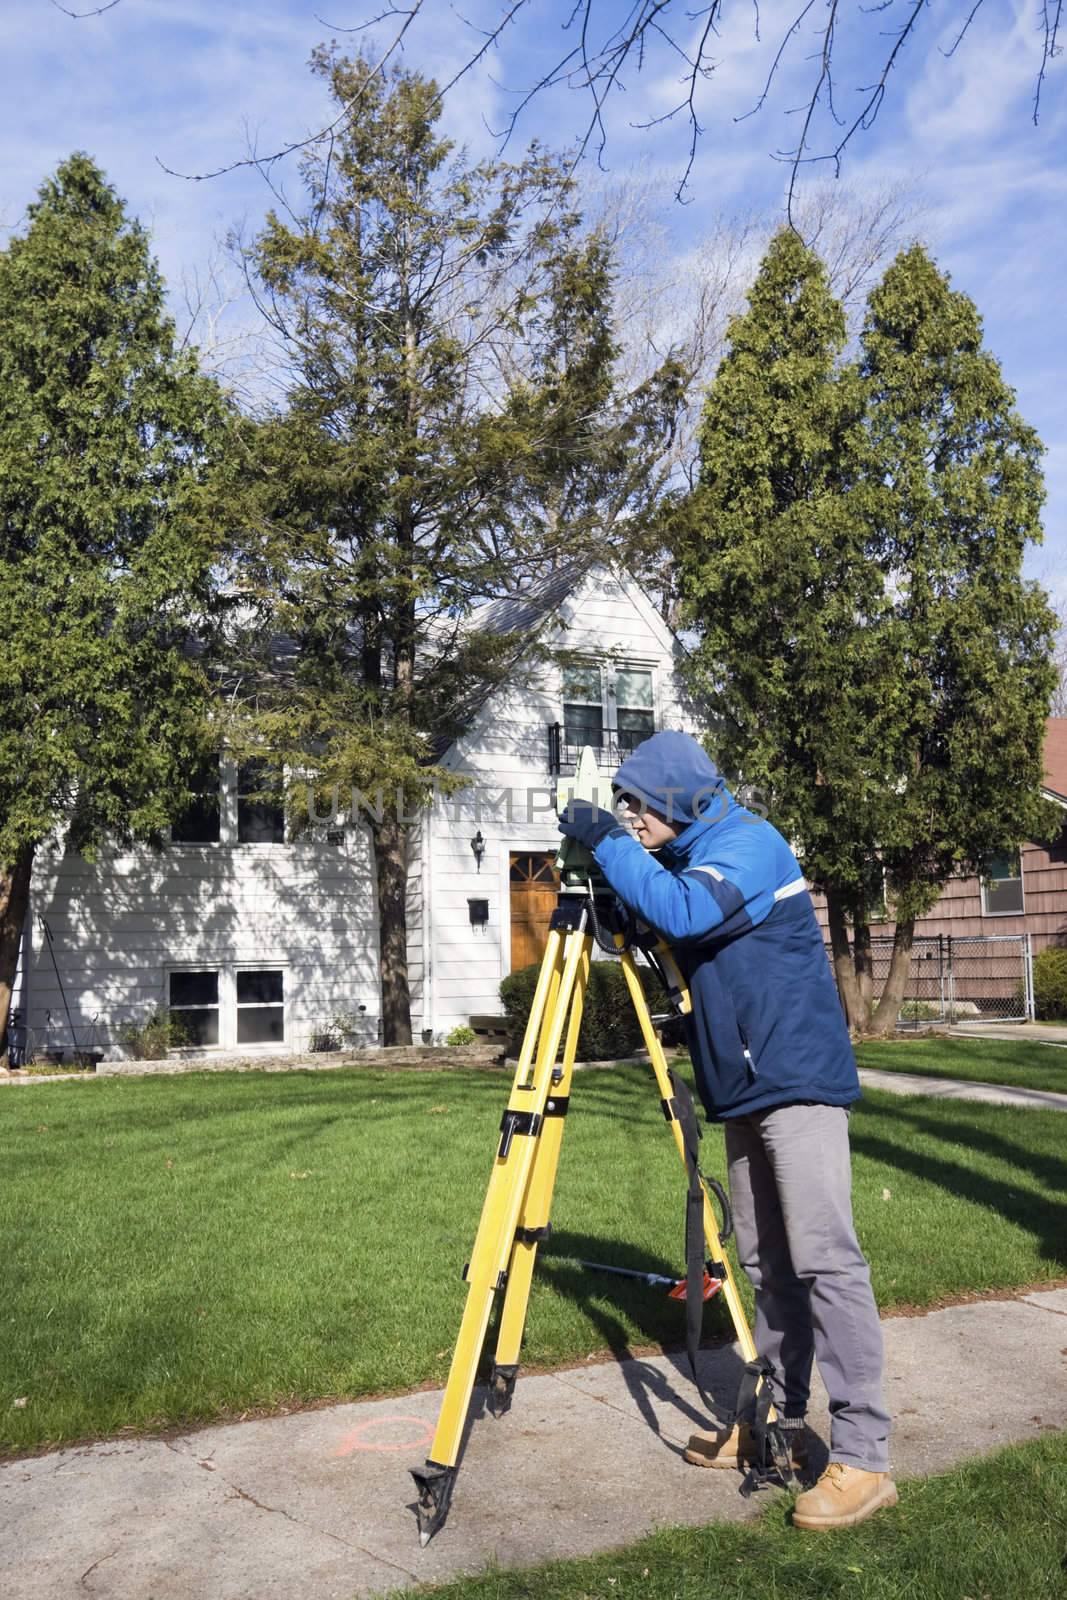 Surveyor working with theodolite in residential area.